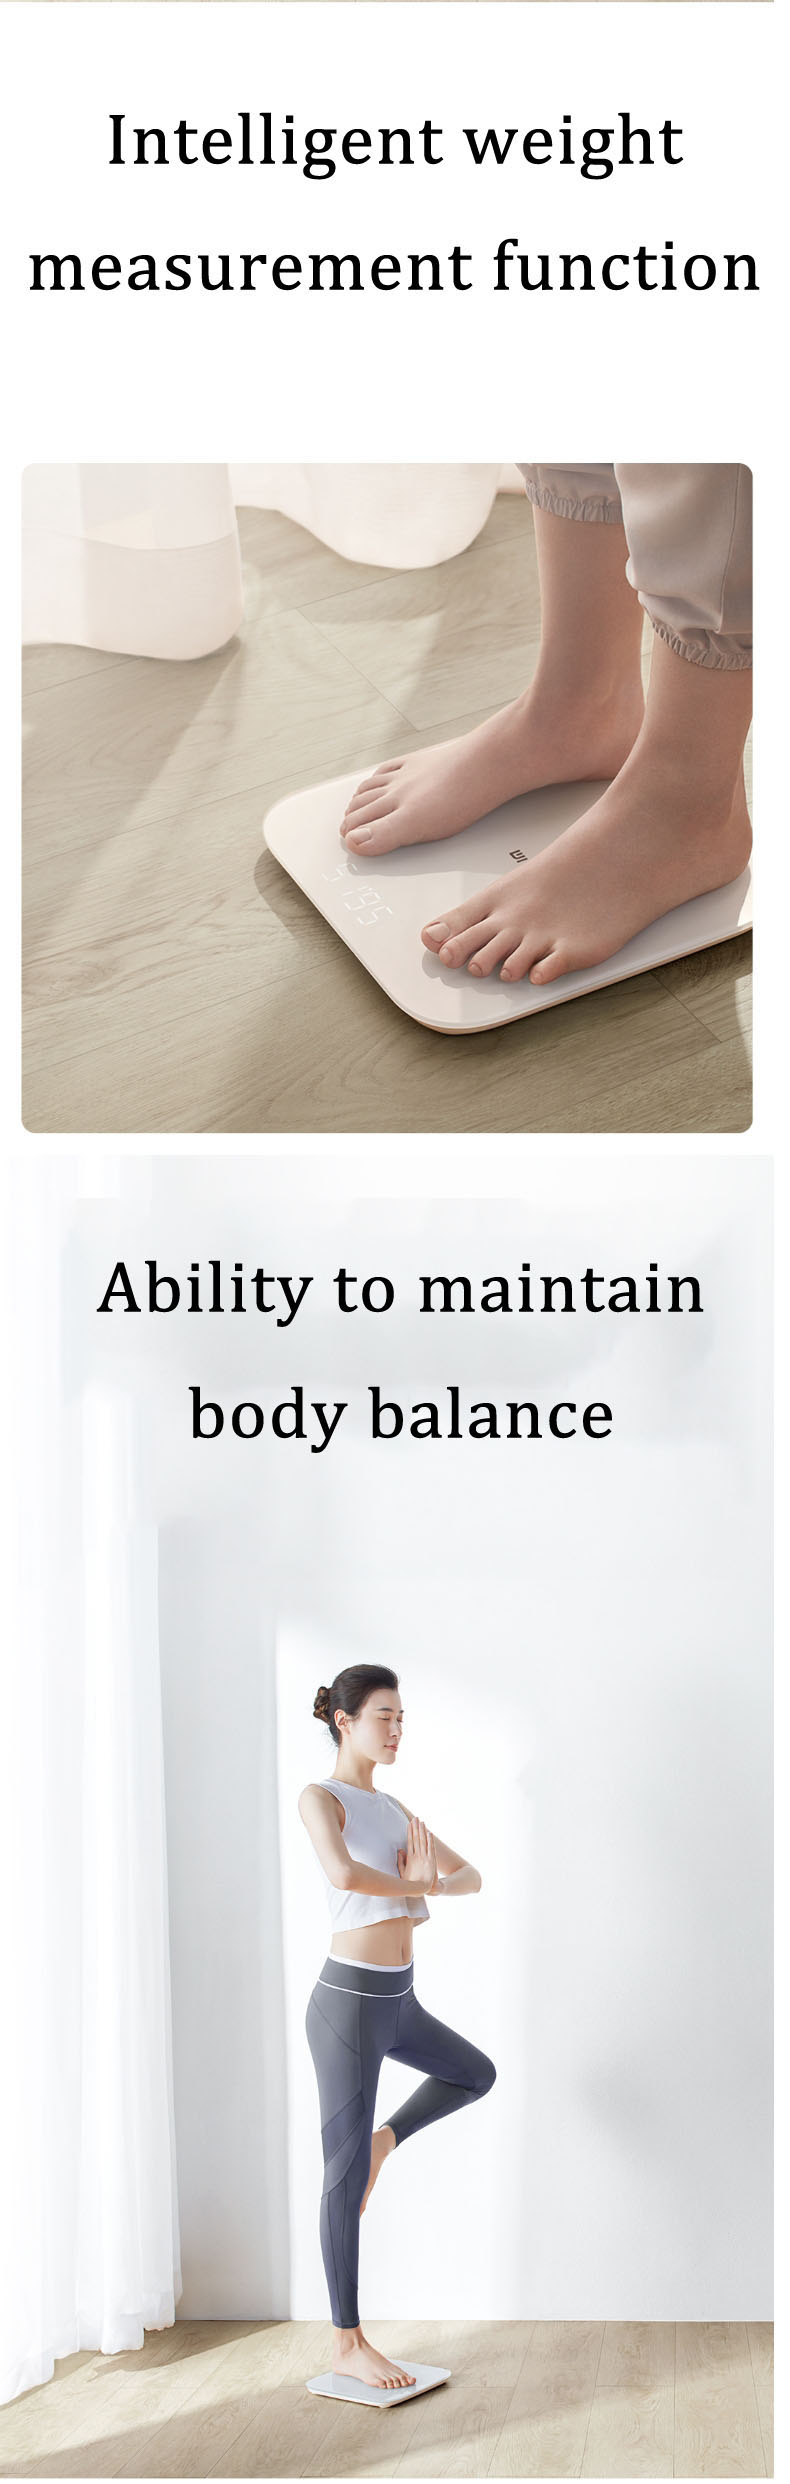 XIAOMI 2.0 Intelligent bluetooth Weight Scale Smart APP Control Precision Weight Scale LED Display Fitness Yoga Tools Scale Support Android IOS 71